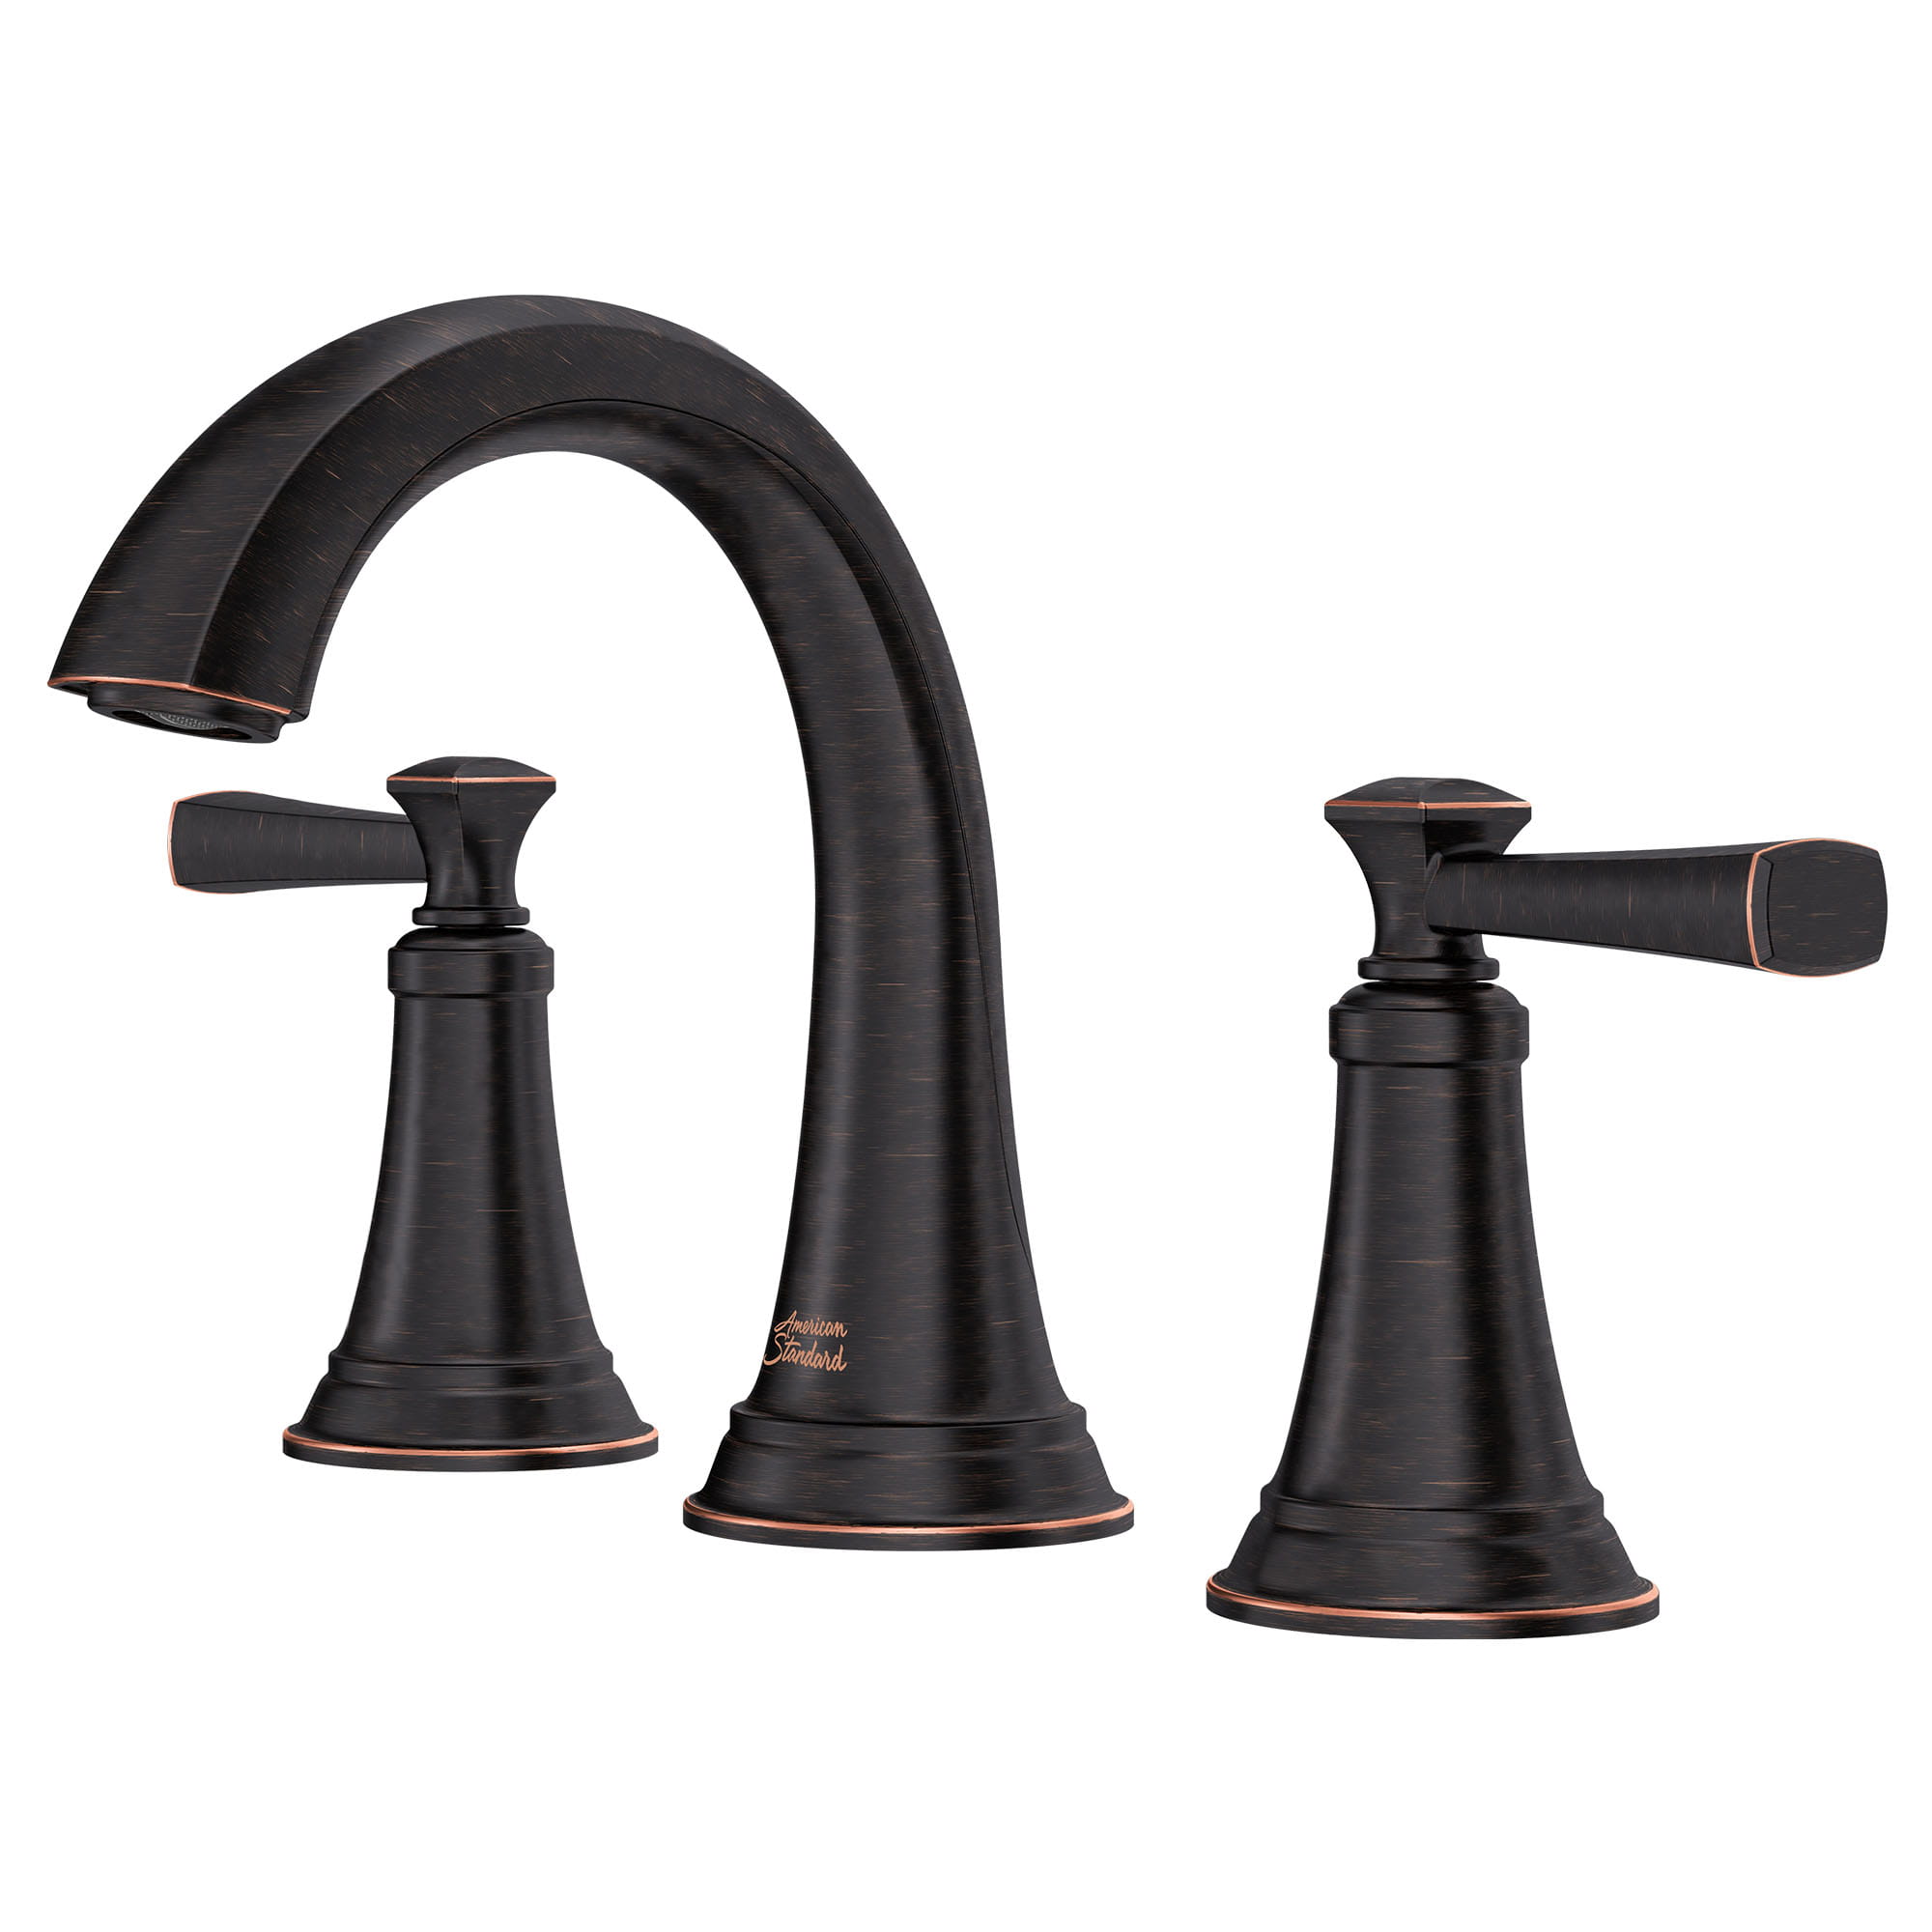 Glenmere 8 Inch Widespread 2 Handle Bathroom Faucet with Metal Drain LEGACY BRONZE